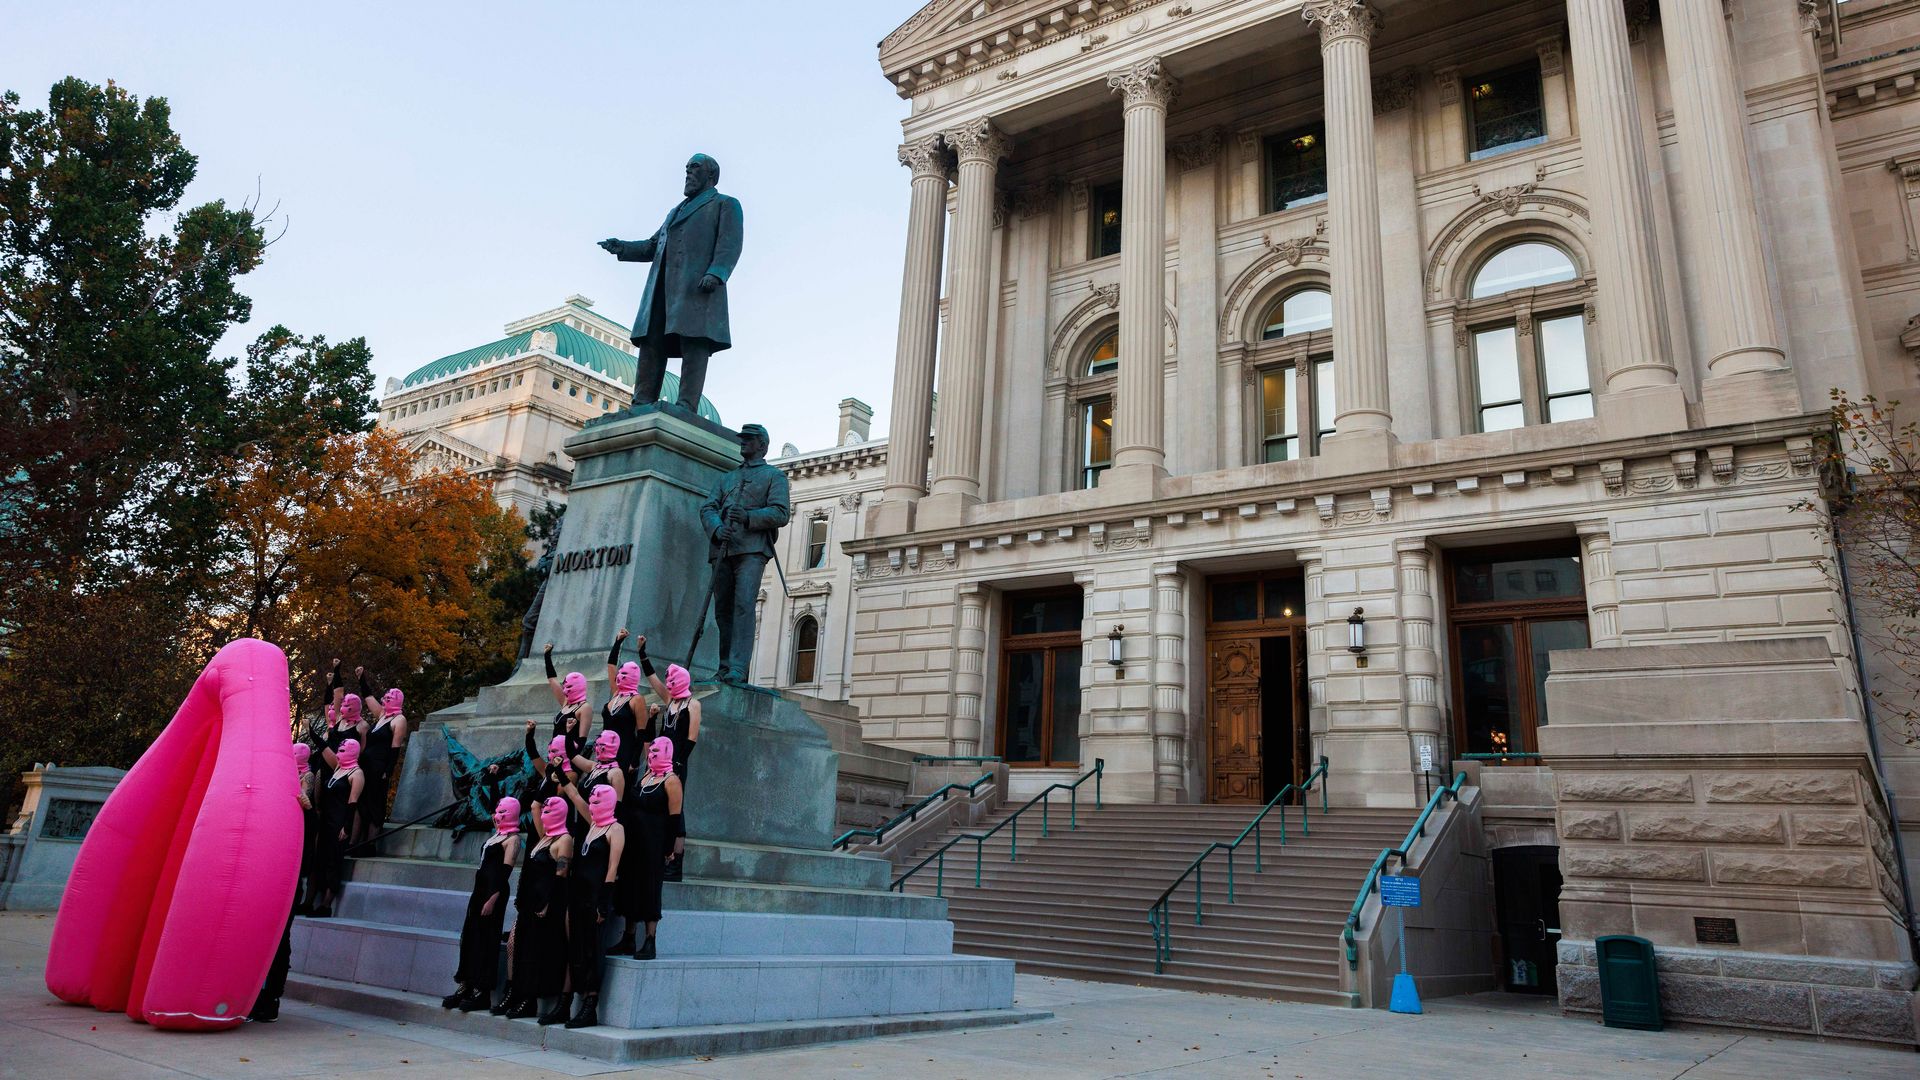 Russian activist group Pussy Riot films a music video for a song titled, "God Save Abortion," to protest Indiana's near-total abortion ban, on the steps of the Indiana Statehouse in Indianapolis.